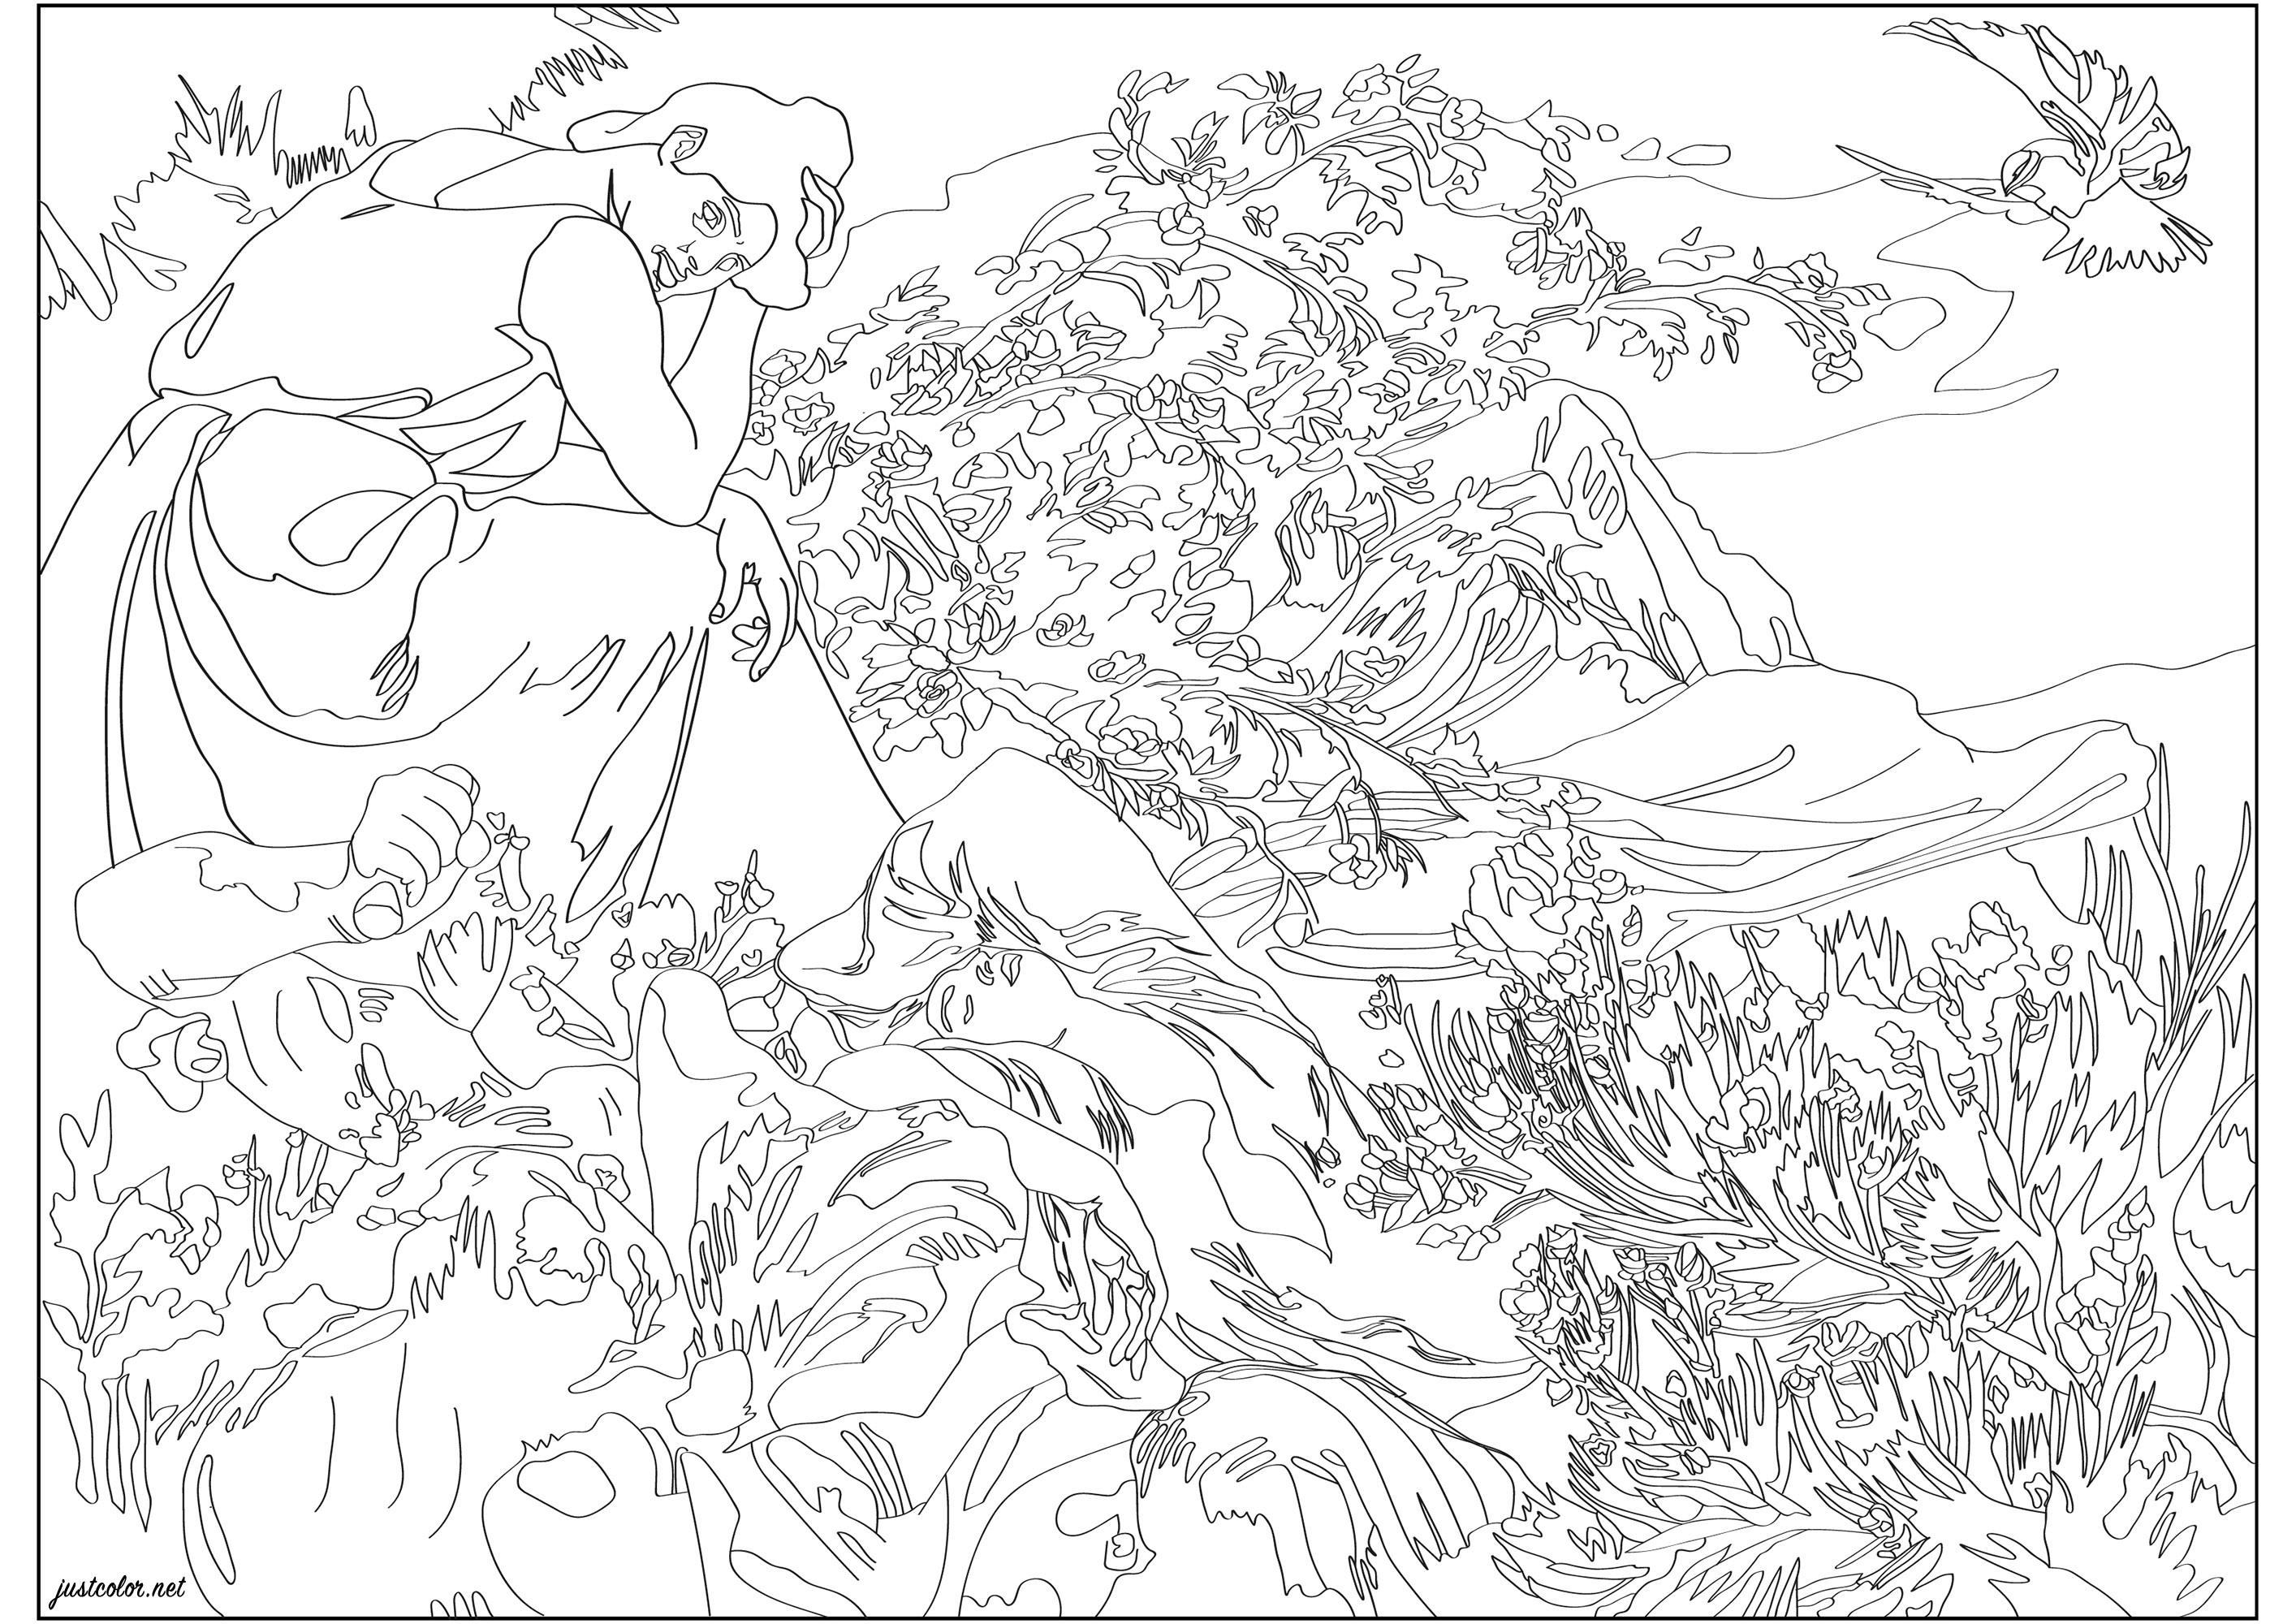 Coloring page created from Victor Prouvé's painting 'Stay of peace and joy' (1899).Born in Nancy in 1858, the son of a fine seamstress and an embroidery designer, Victor Prouvé studied drawing at the municipal school in his hometown. A few years later, he joined the School of Fine Arts in Paris as a scholarship holder, where he studied under the academic painter Alexandre Cabanel. He exhibited at the Salon of the National Society of Fine Arts from 1882 where he won several prizes while receiving his first orders.